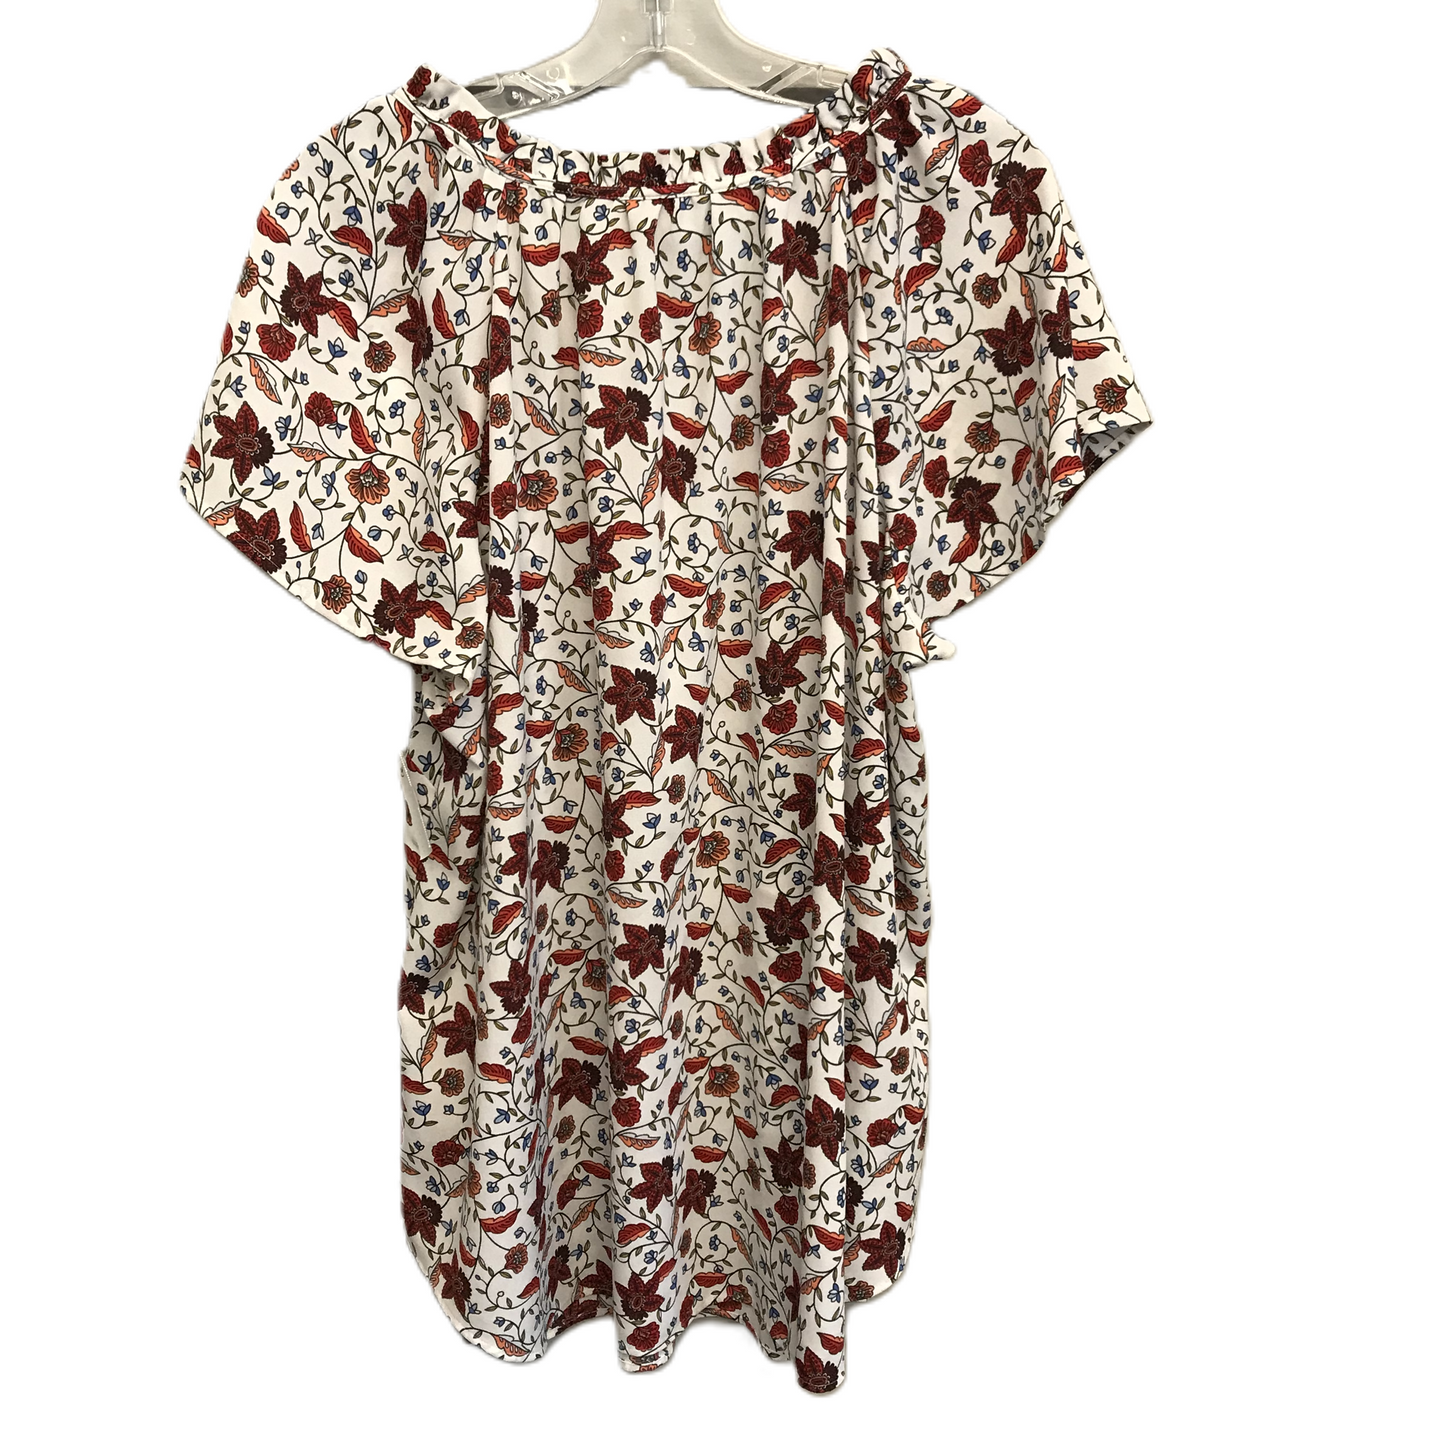 Floral Print Top Short Sleeve By Loft, Size: 2x